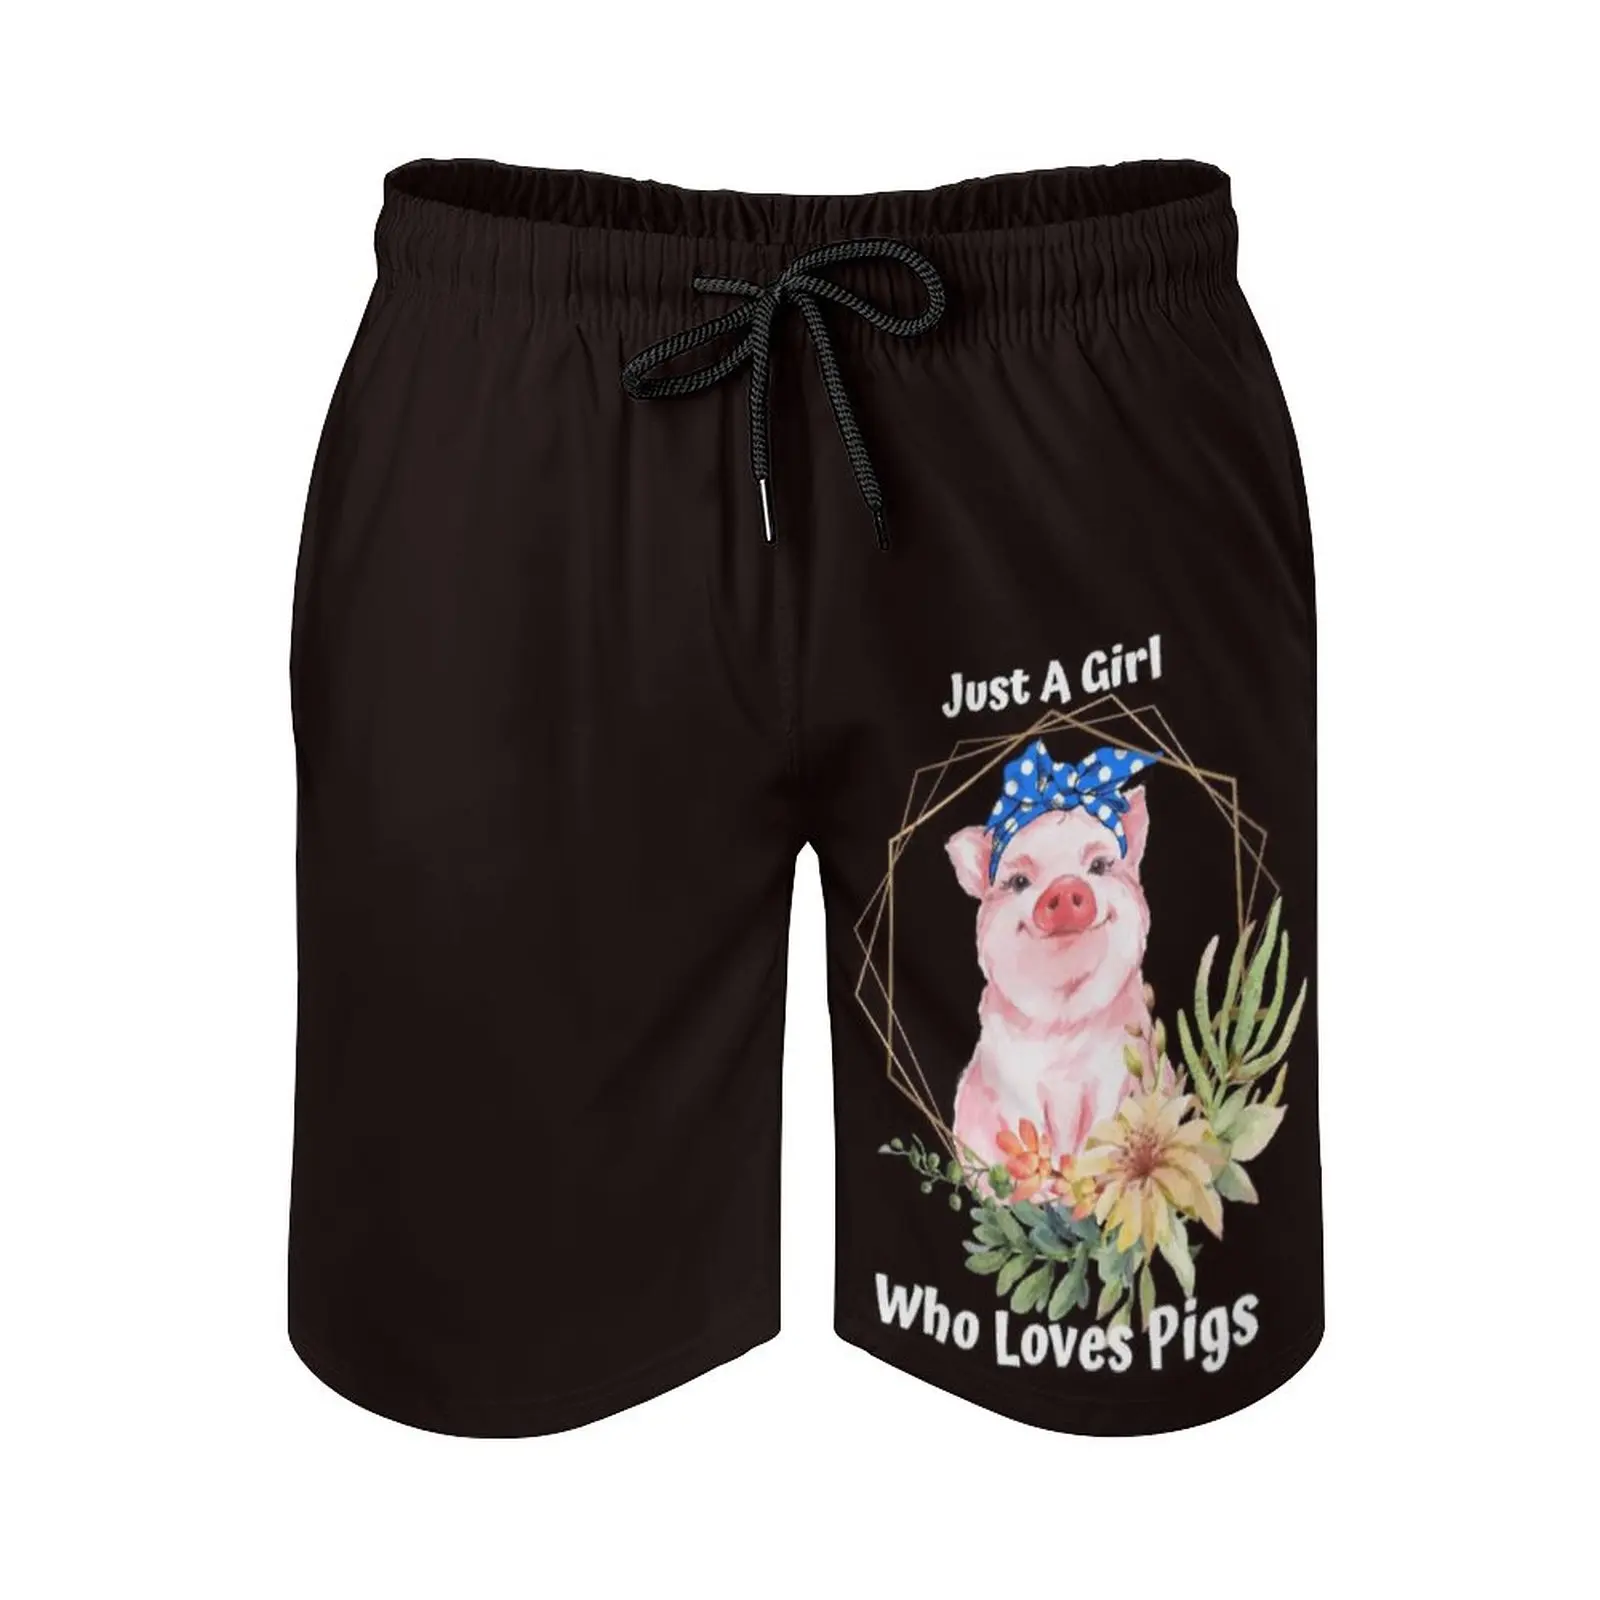 

Just A Girl Who Loves Pigs Men's Beach Shorts Swim Trunks With Pockets Mesh Lining Surfing Pig For Girls Pig Stuff Pig Stuff